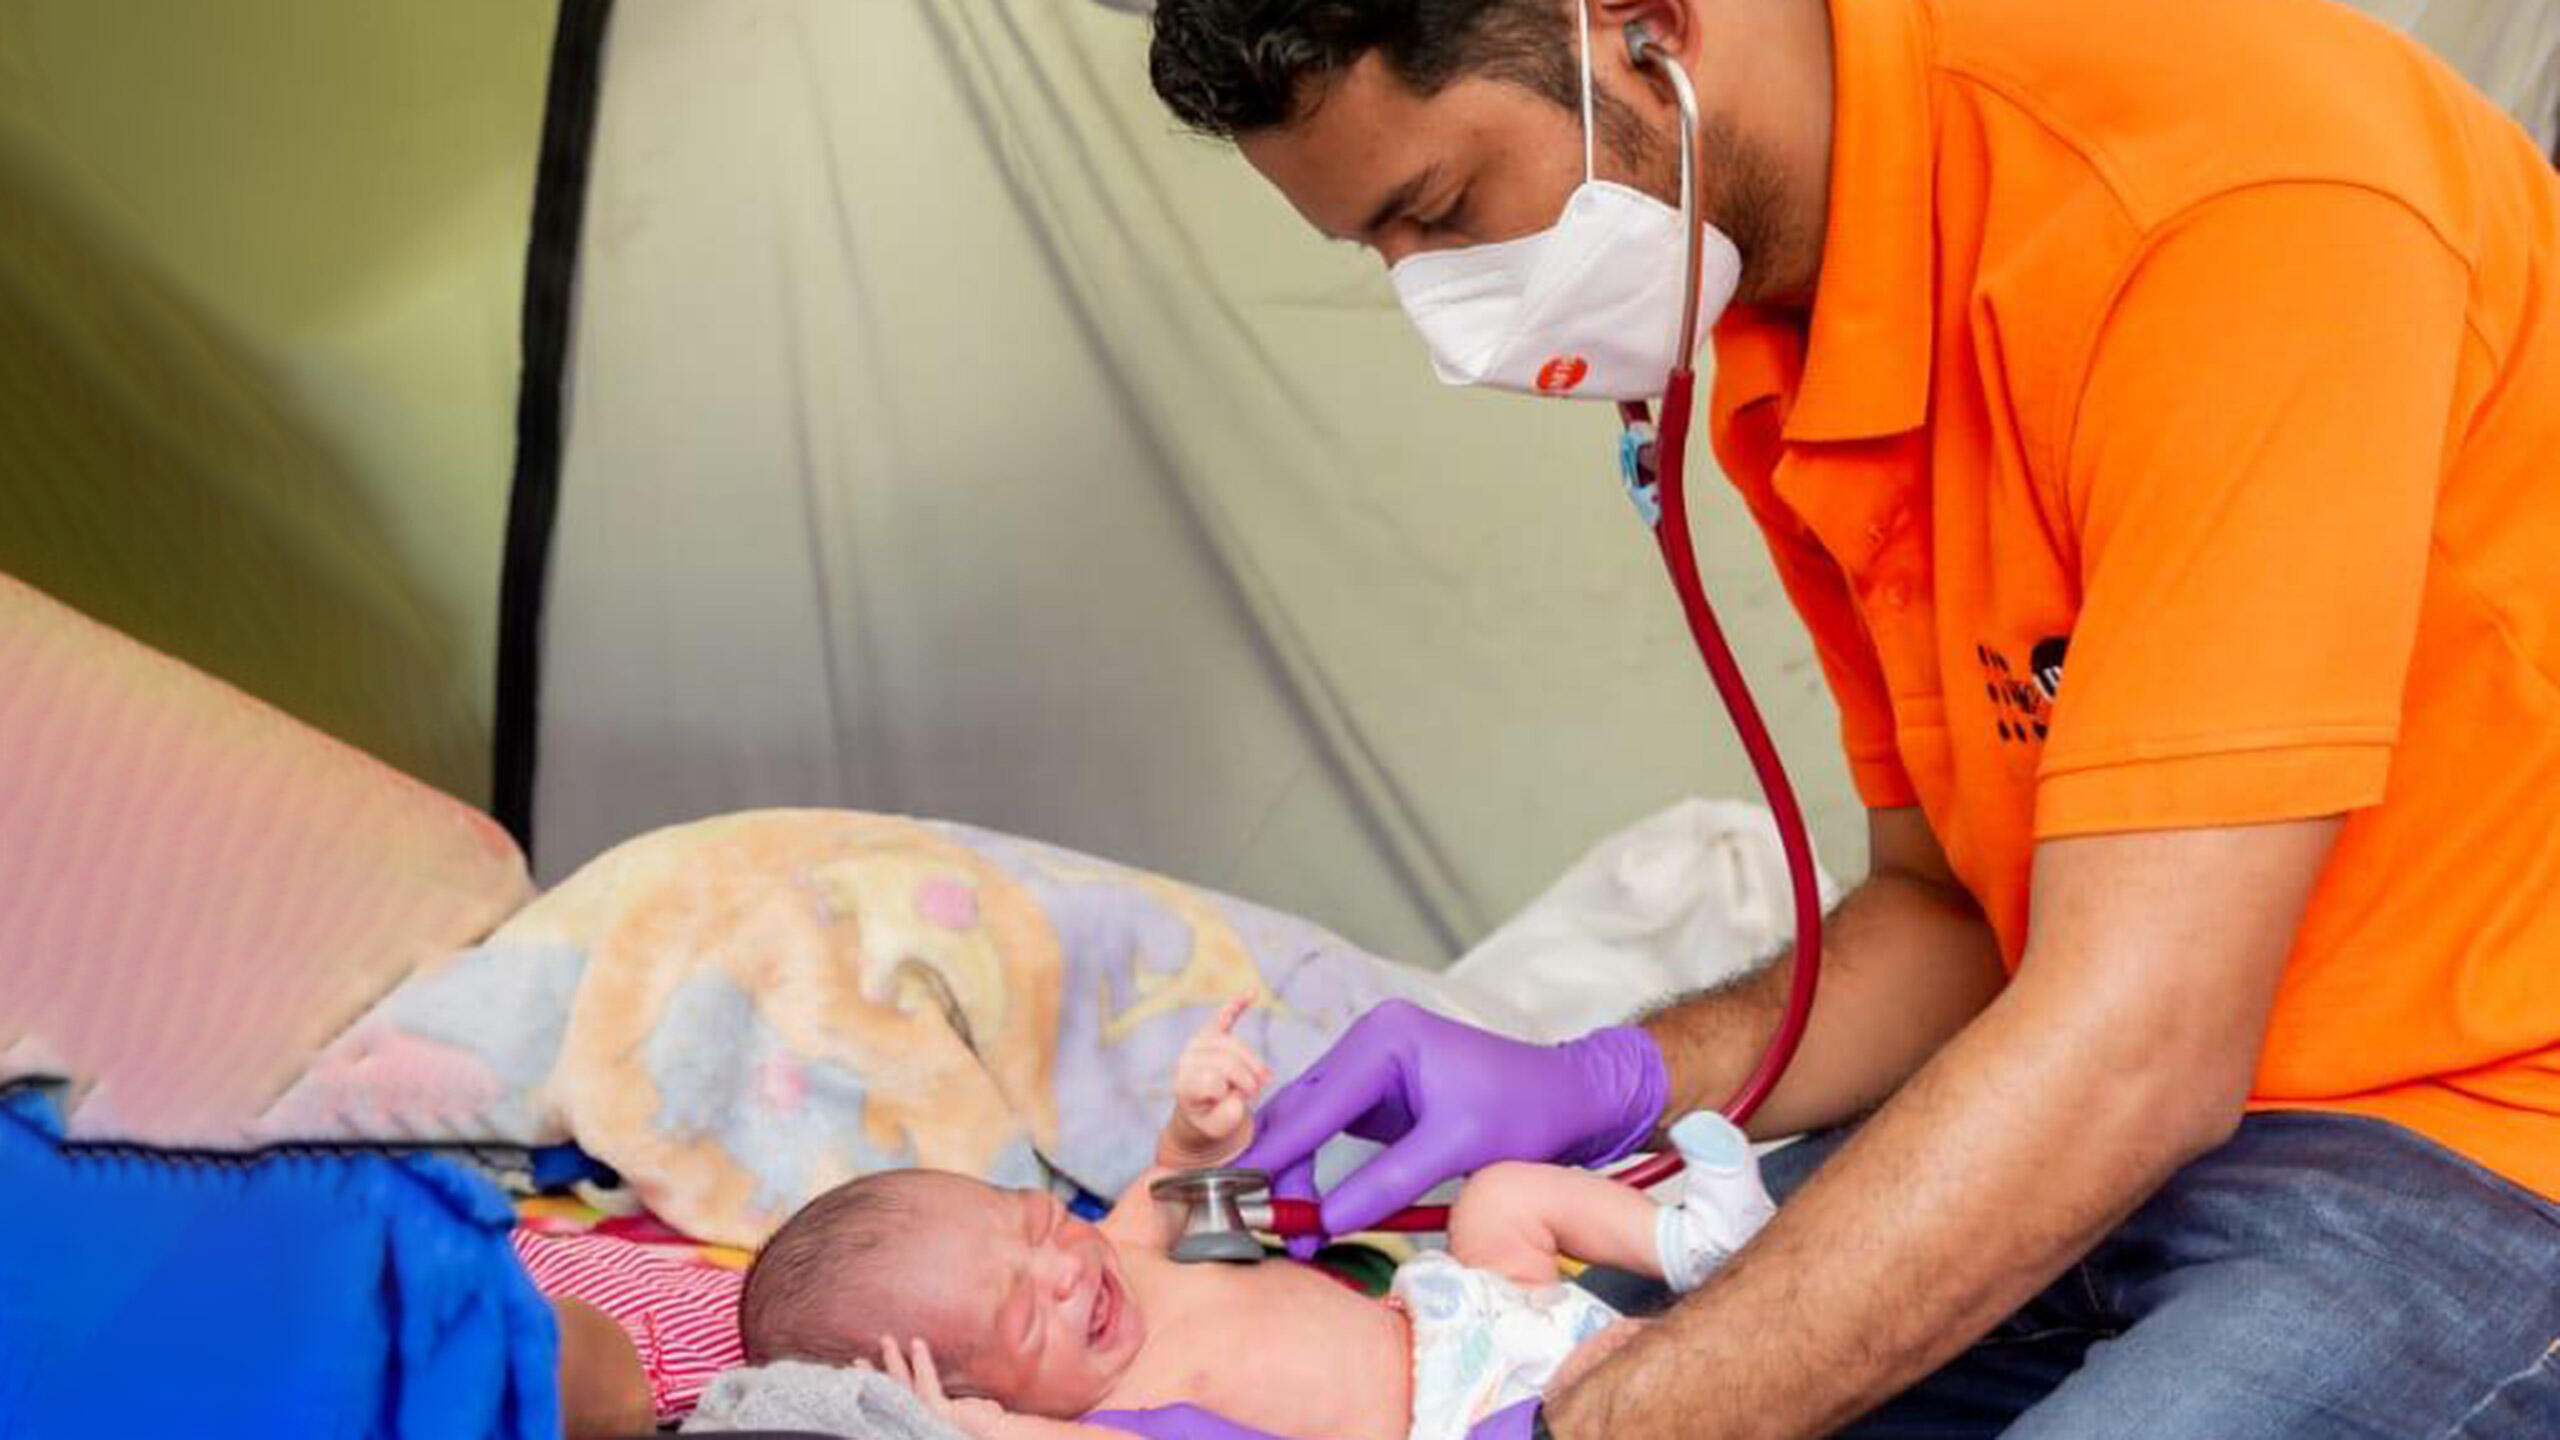 Natural disasters broke records throughout the year. Baby Joshua Enmanuel was born under a bridge where his family sought shelter following the deadly hurricanes that swept through the country in late 2020. The storms destroyed homes, health facilities and left millions without means to access life-saving care.  